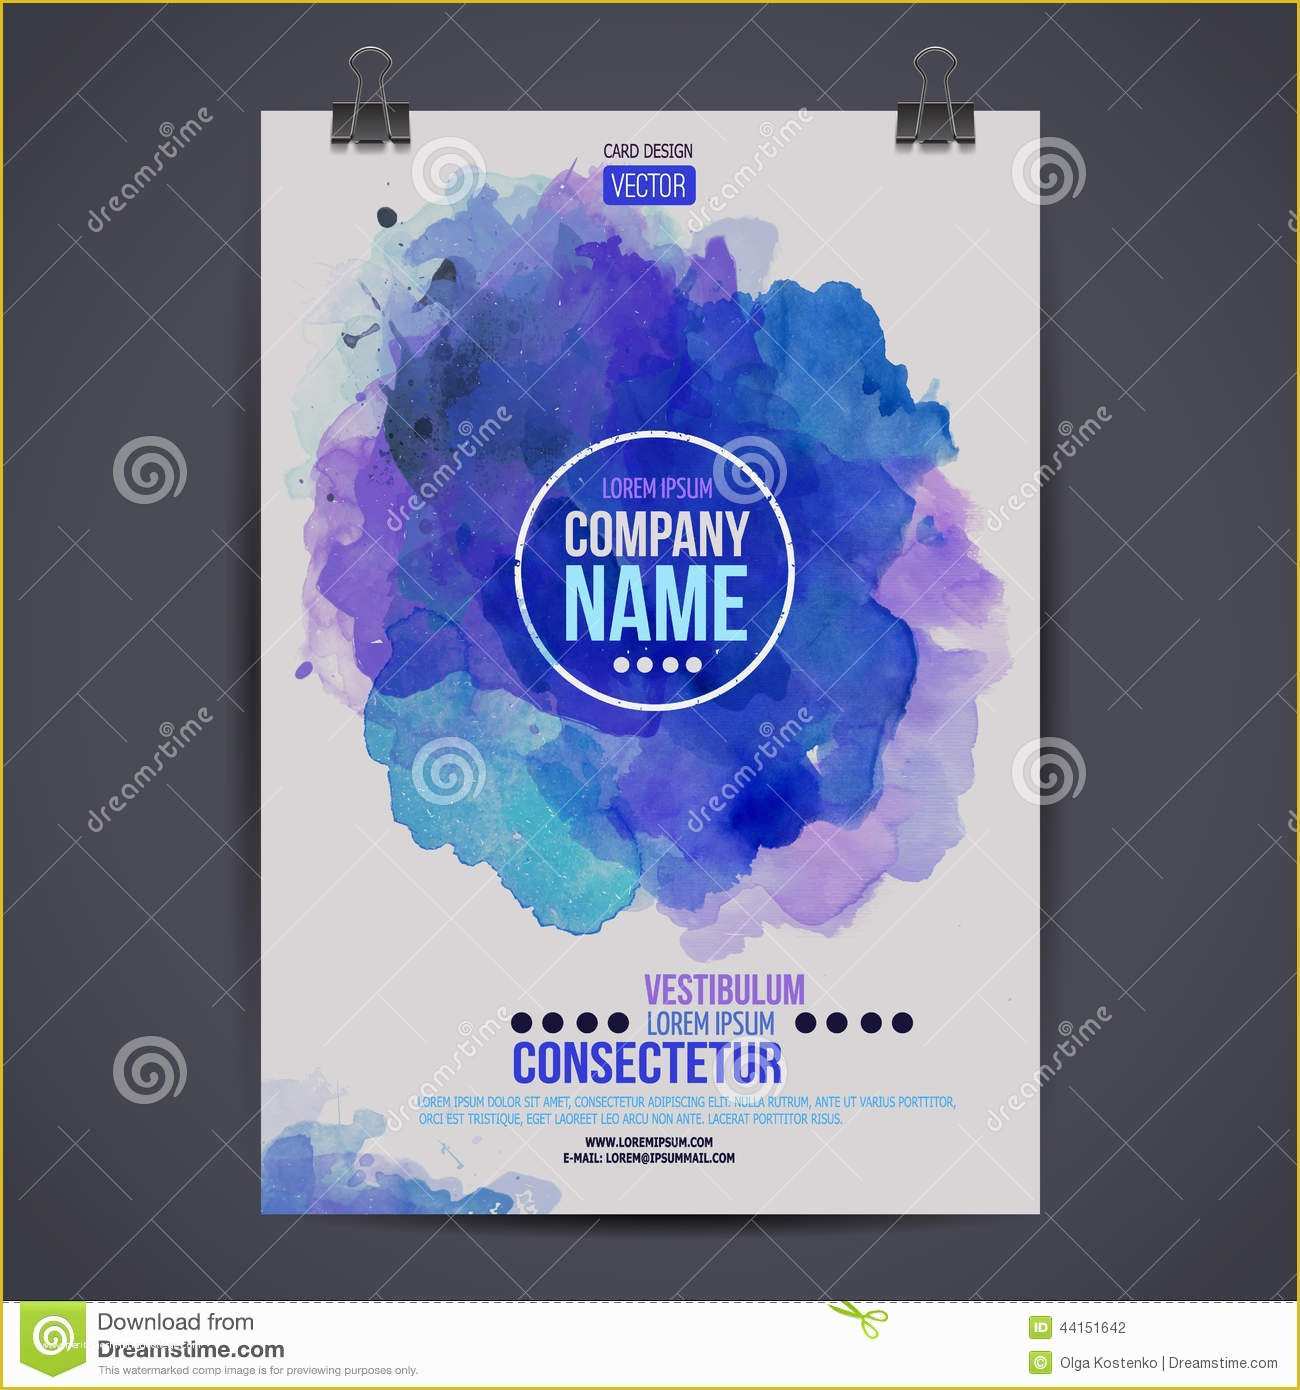 Painting Company Website Templates Free Download Of Vector Watercolor Poster Stock Vector Illustration Of